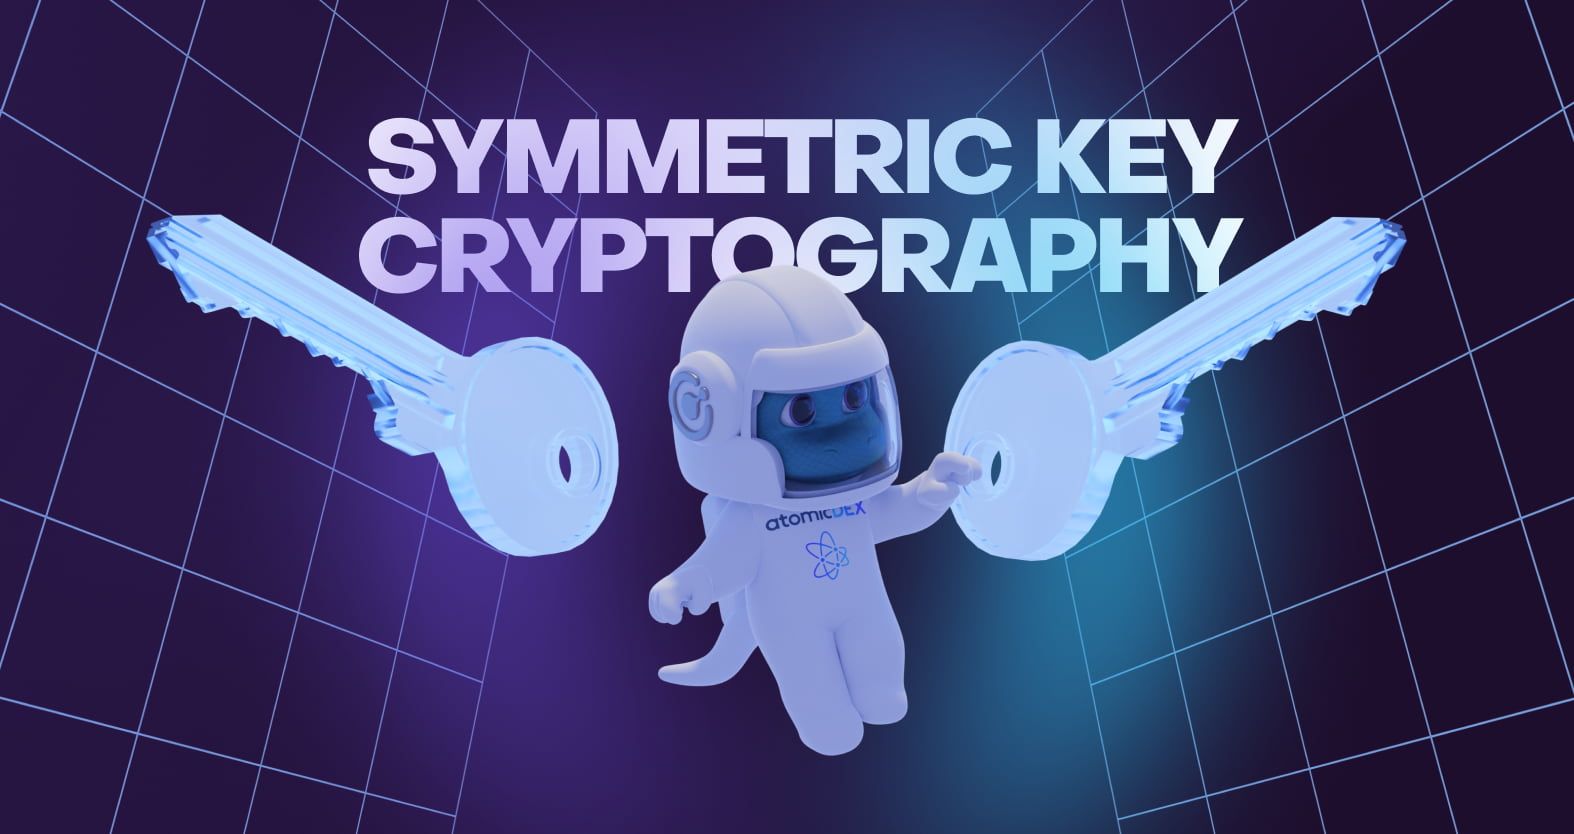 Symmetric Key Cryptography — What Is It and How Does It Work?